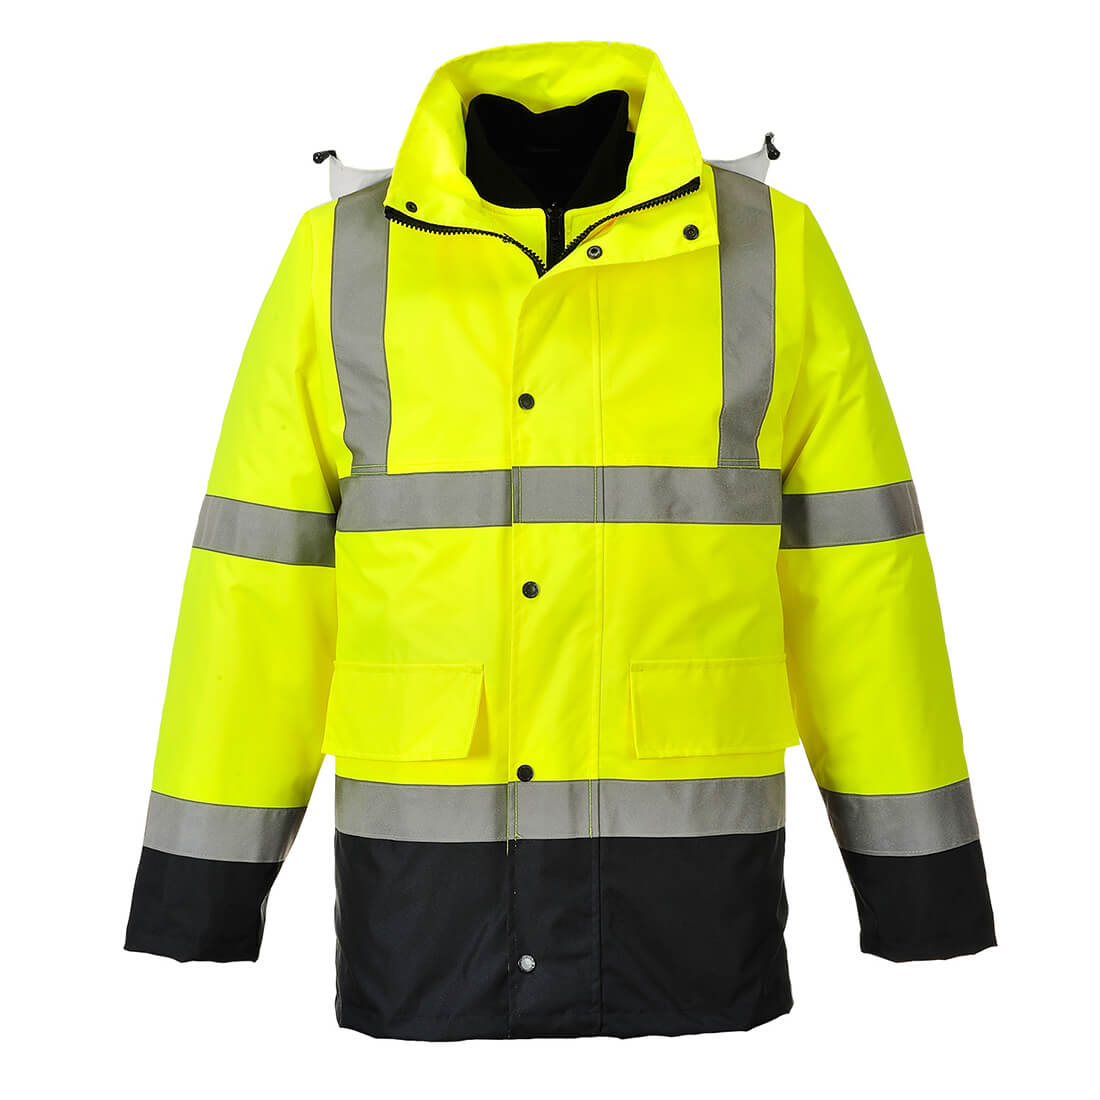 Image of Oxford Weave 300D Class 3 Hi Vis 4-in-1 Traffic Jacket Yellow / Navy 2XL